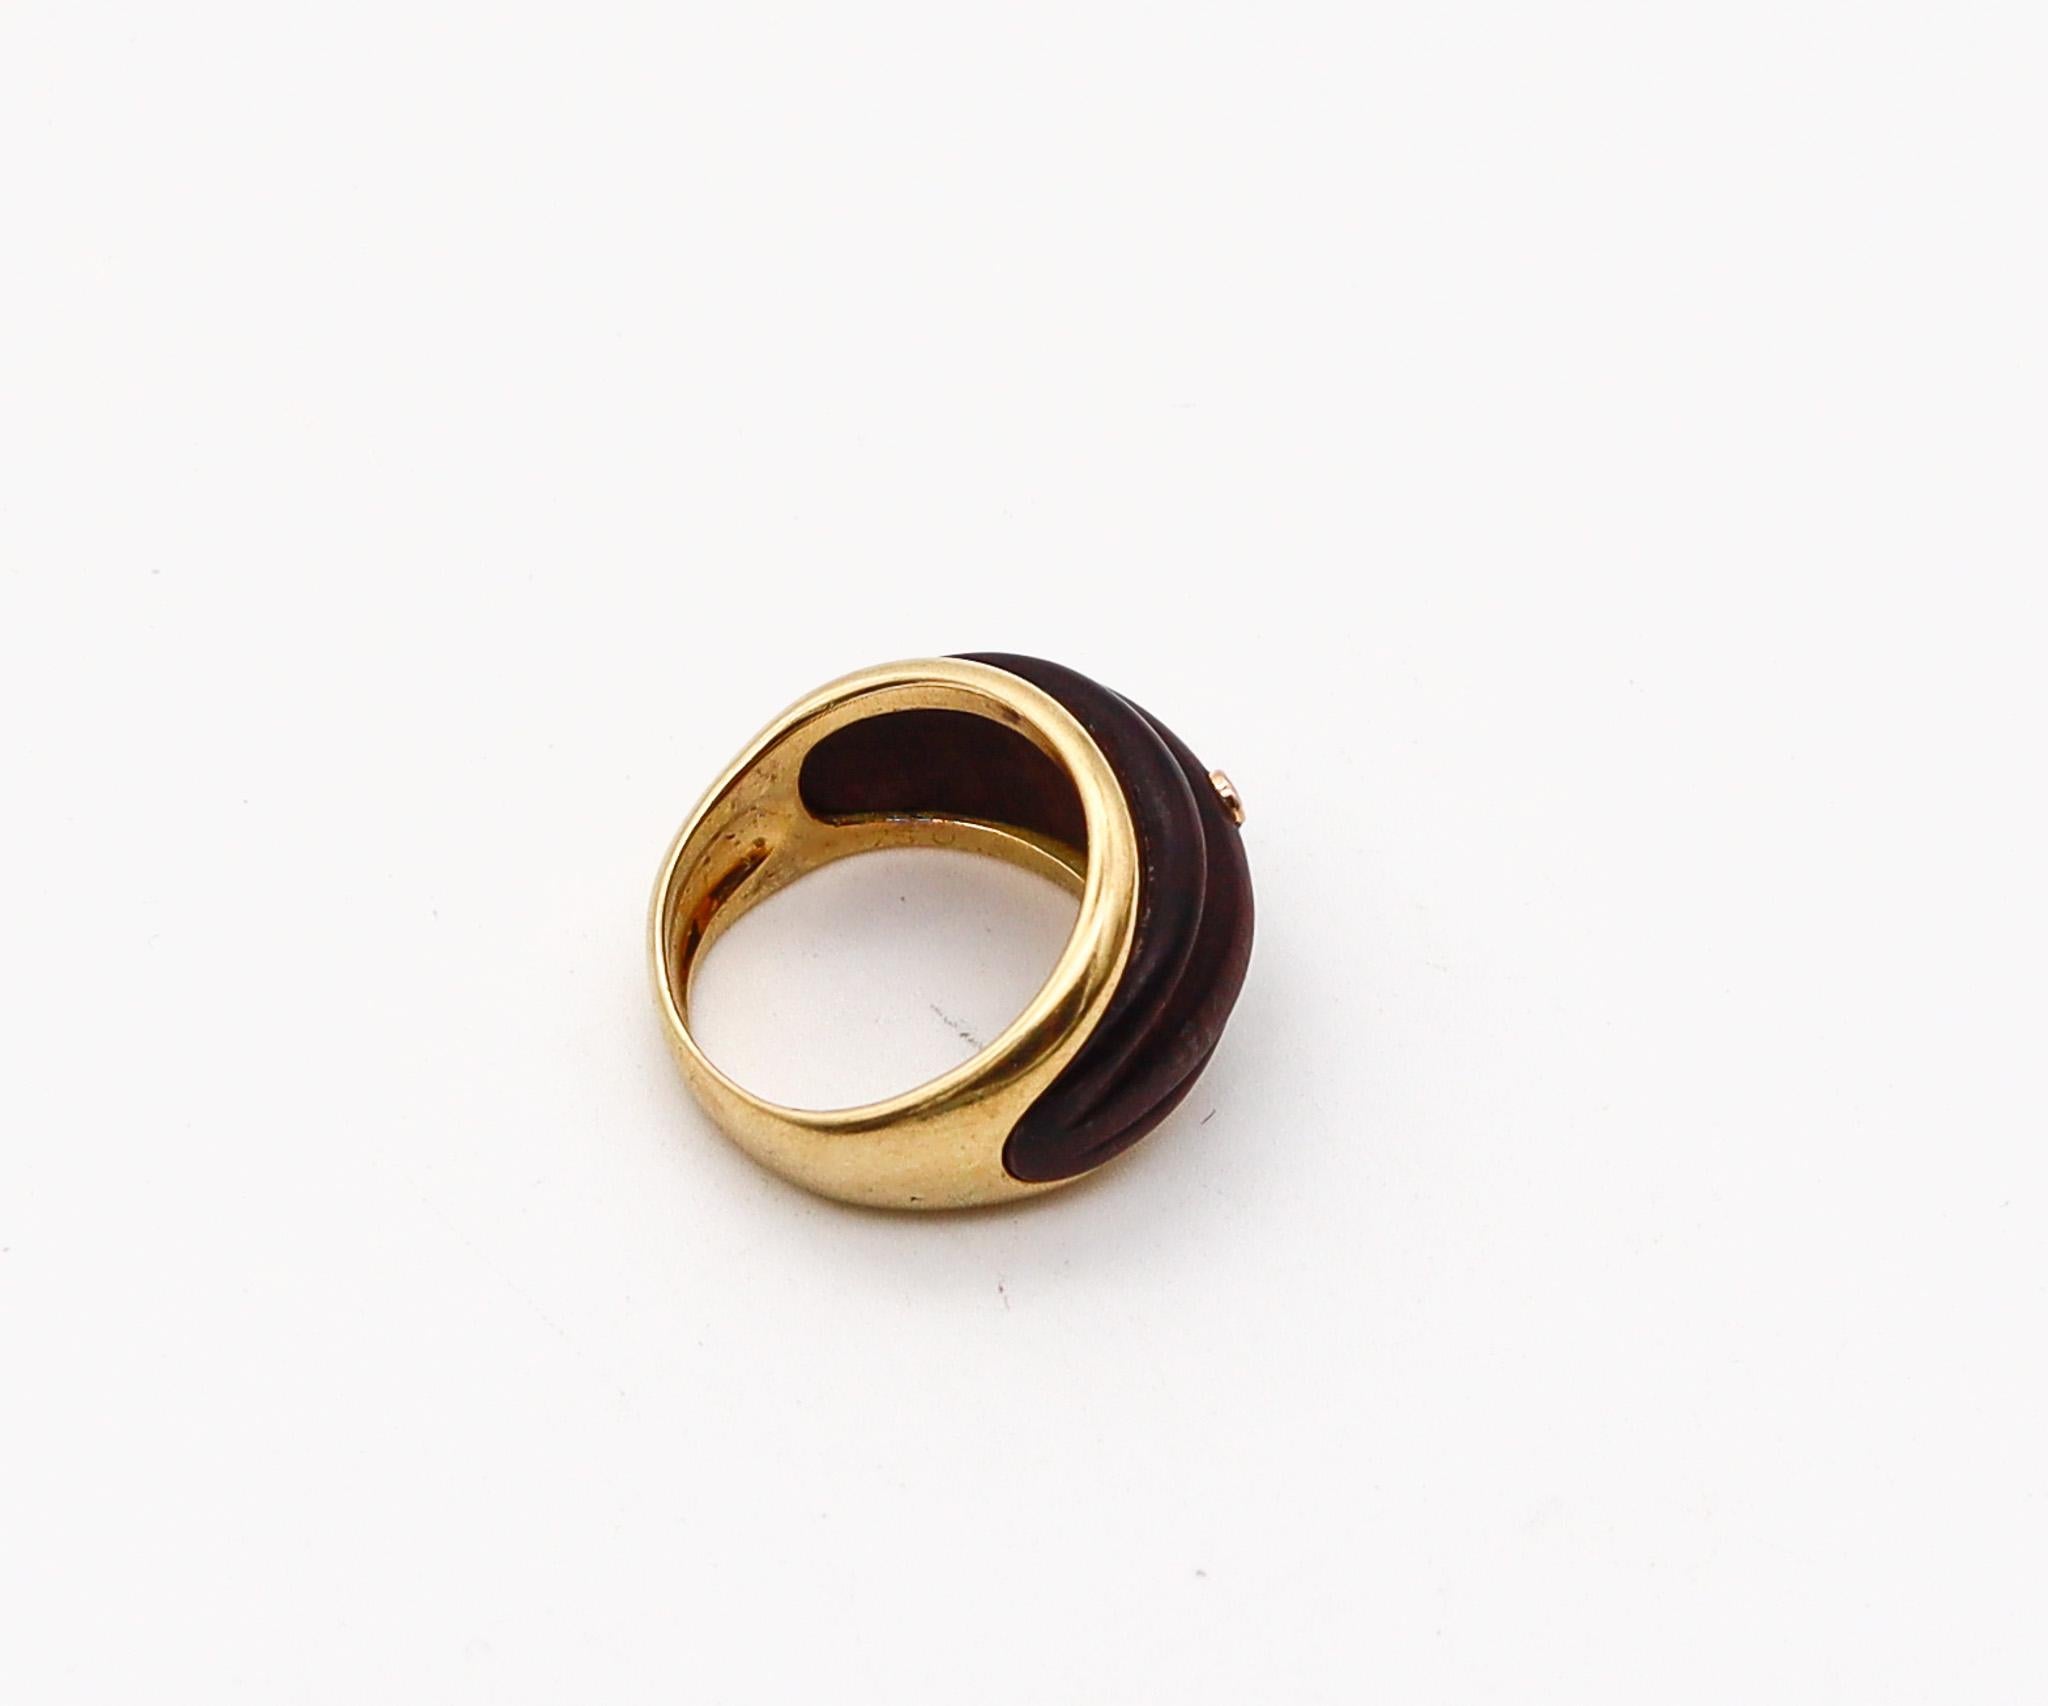 Brilliant Cut Van Cleef & Arpels 1970 Paris Wood Cocktail Ring In 18Kt Yellow Gold And Diamond For Sale